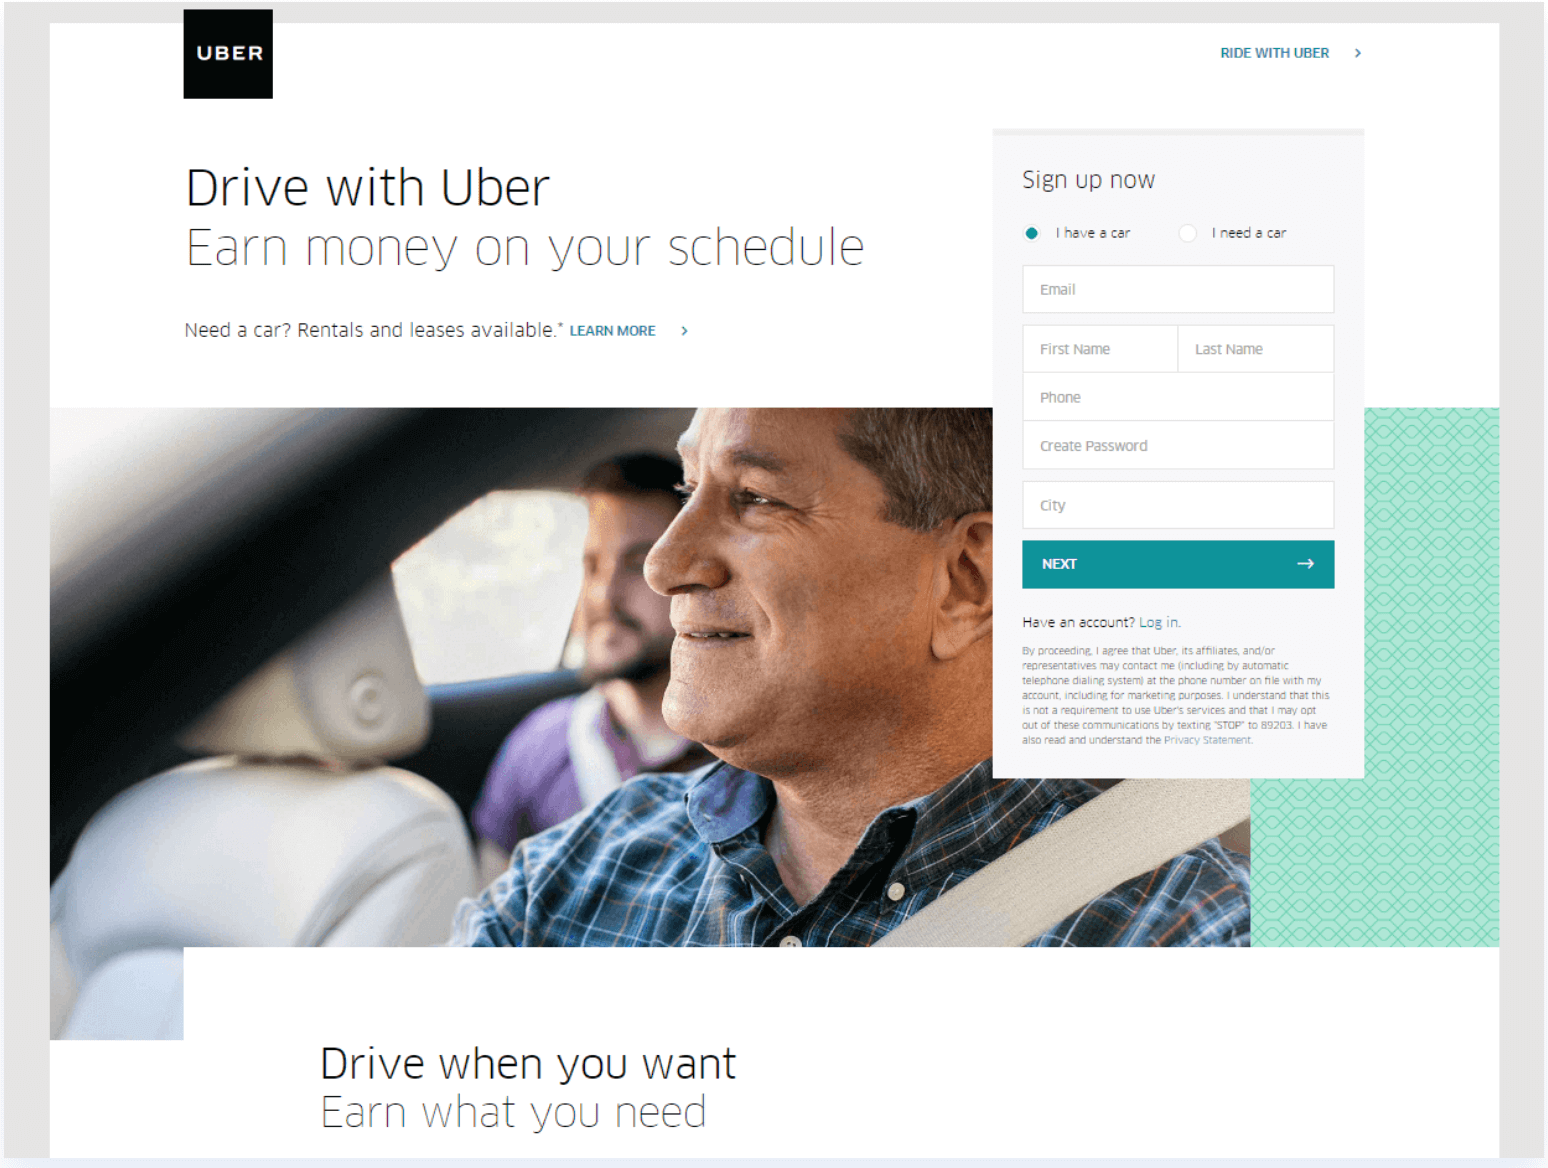 A driver sign up page for Uber